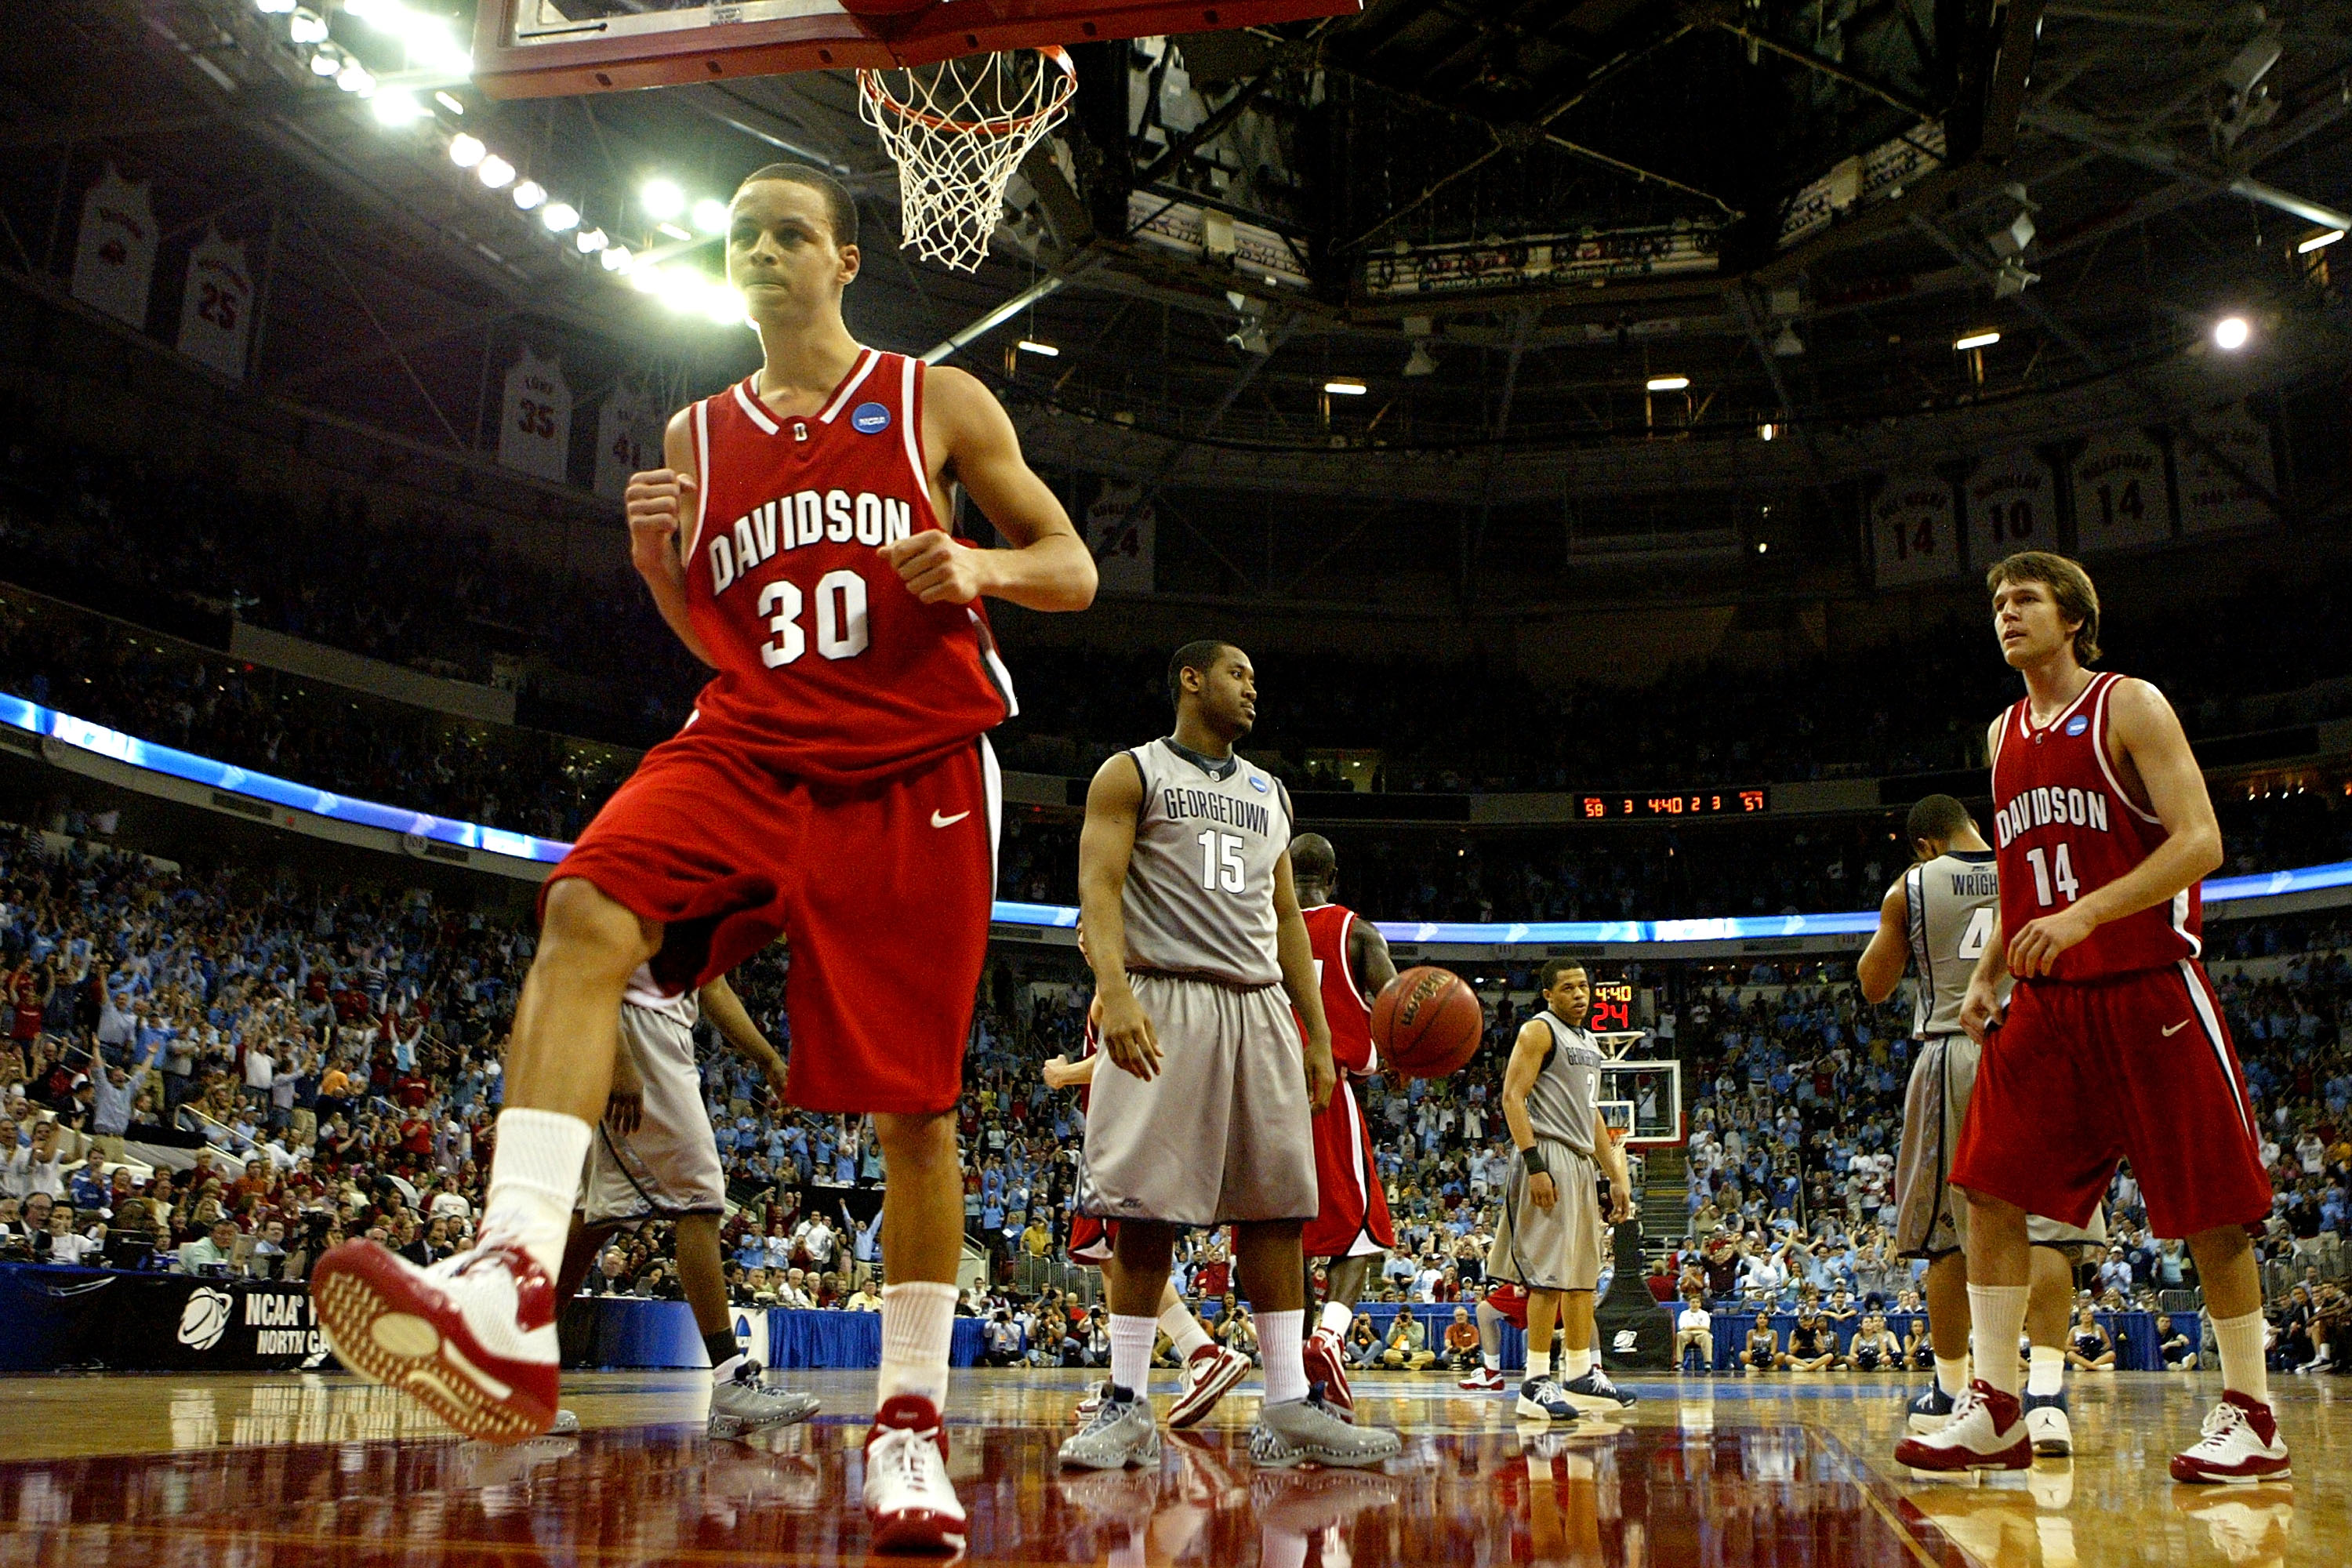 March Madness cinderella stories: Steph Curry leads Davidson - Mid